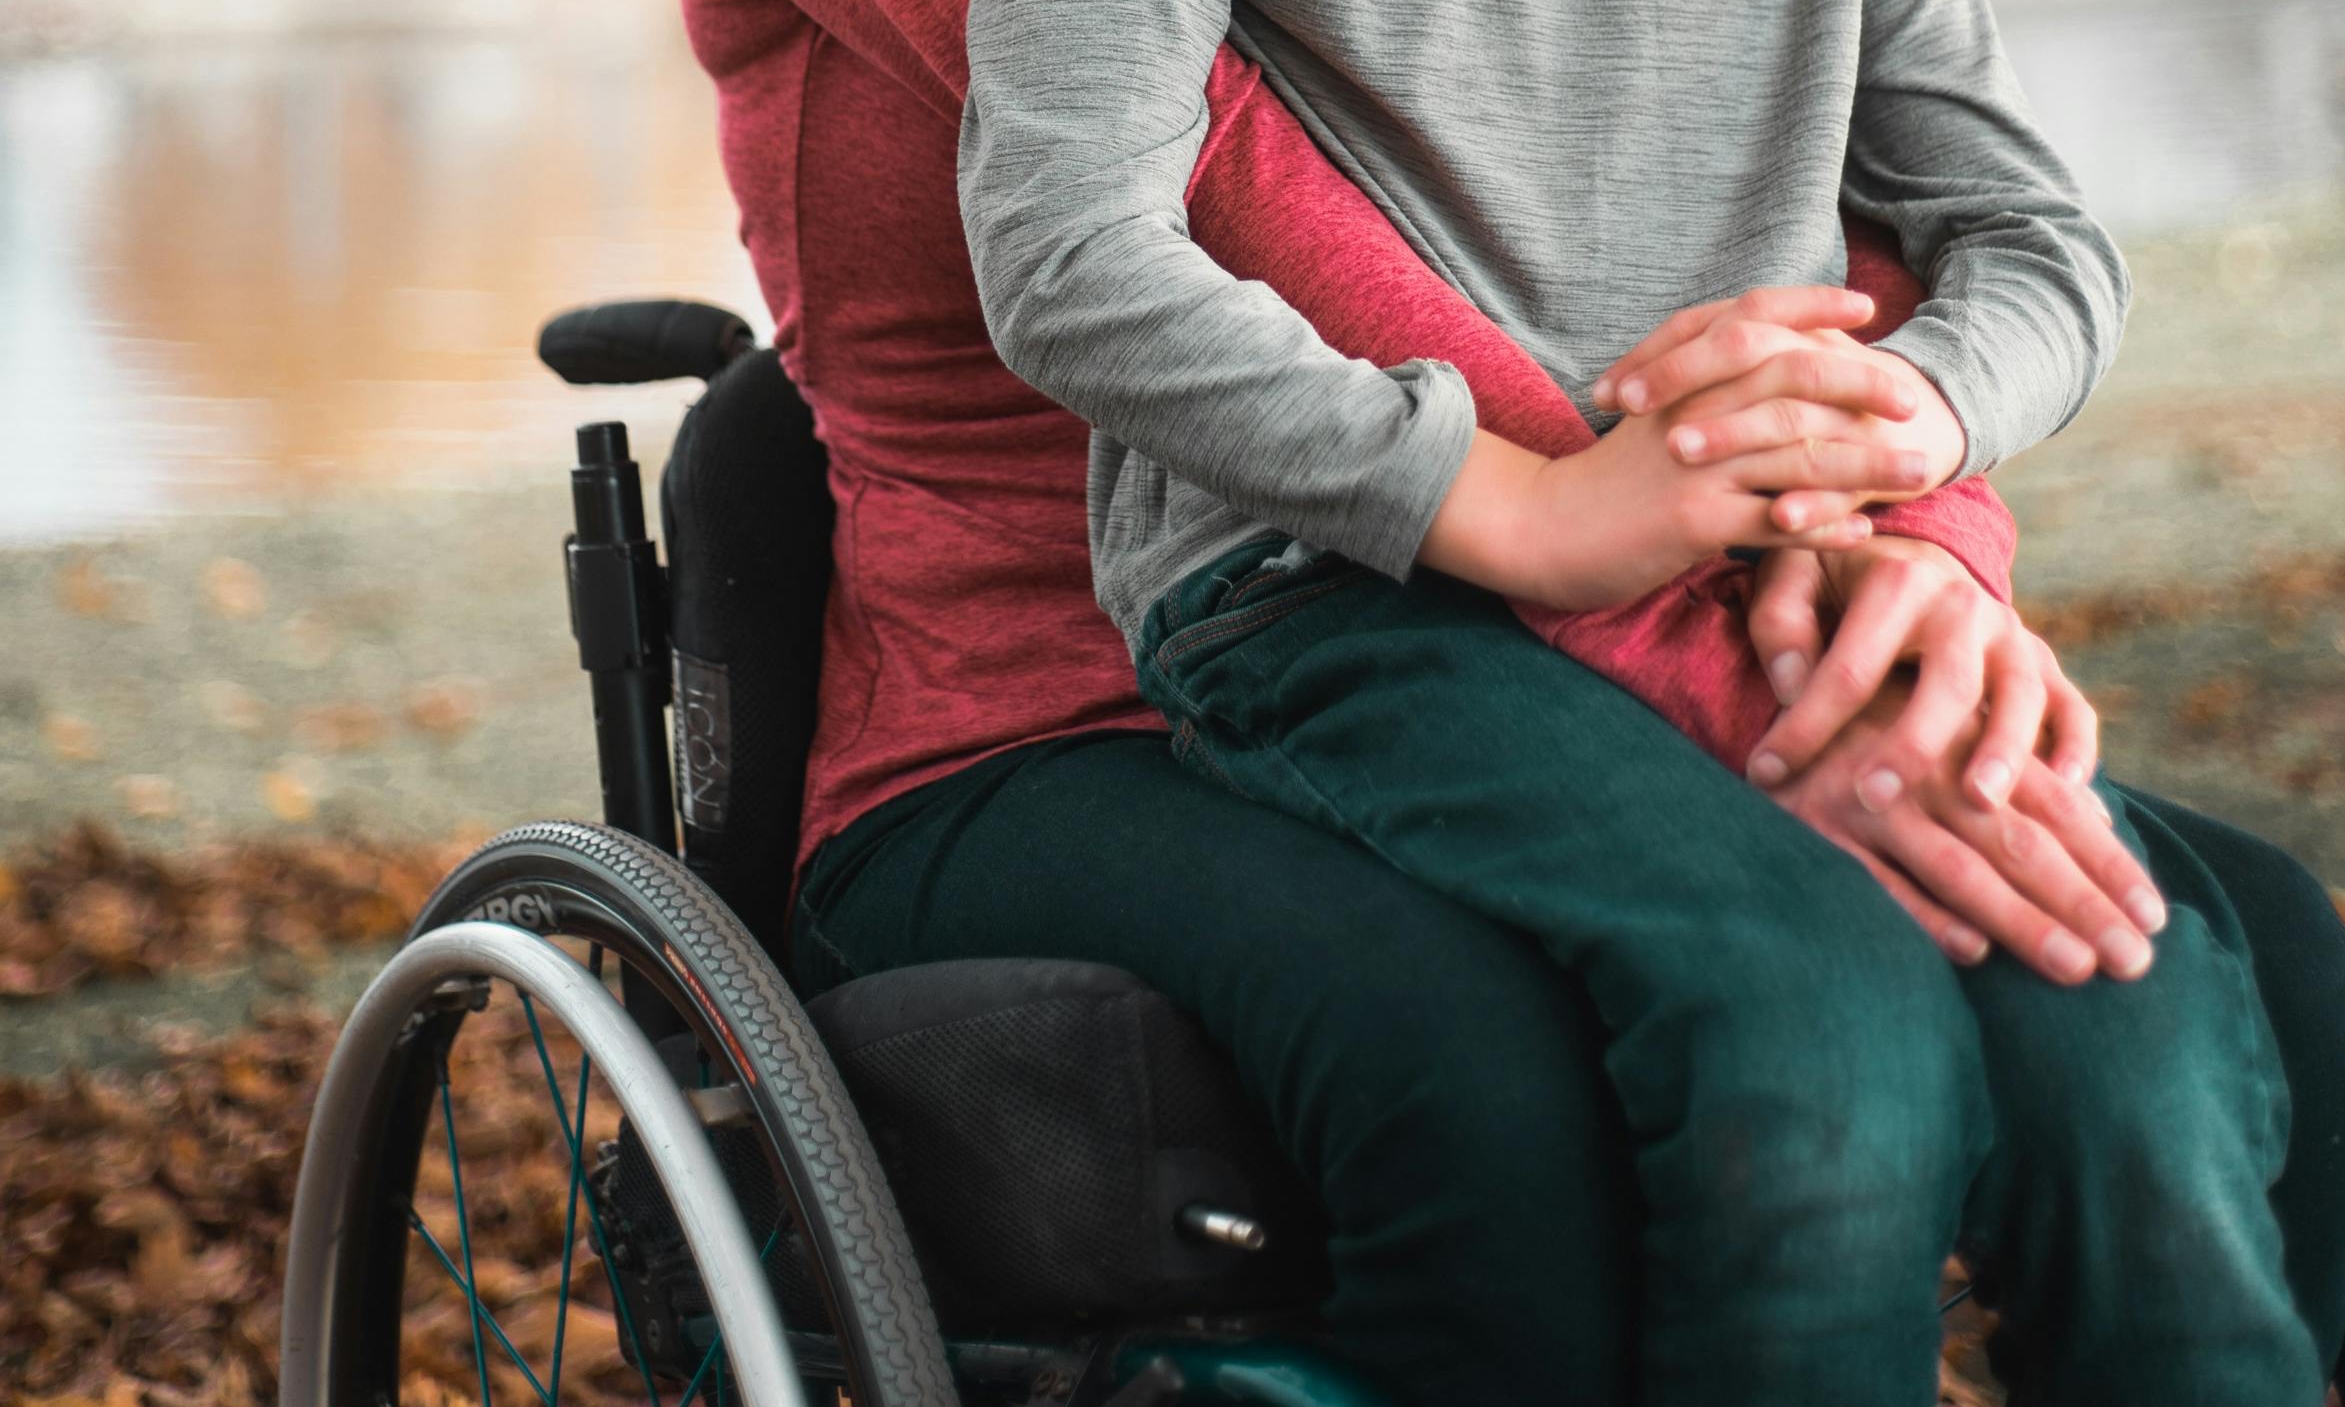 A woman and boy sit together in a wheelchair | Source: Pexels